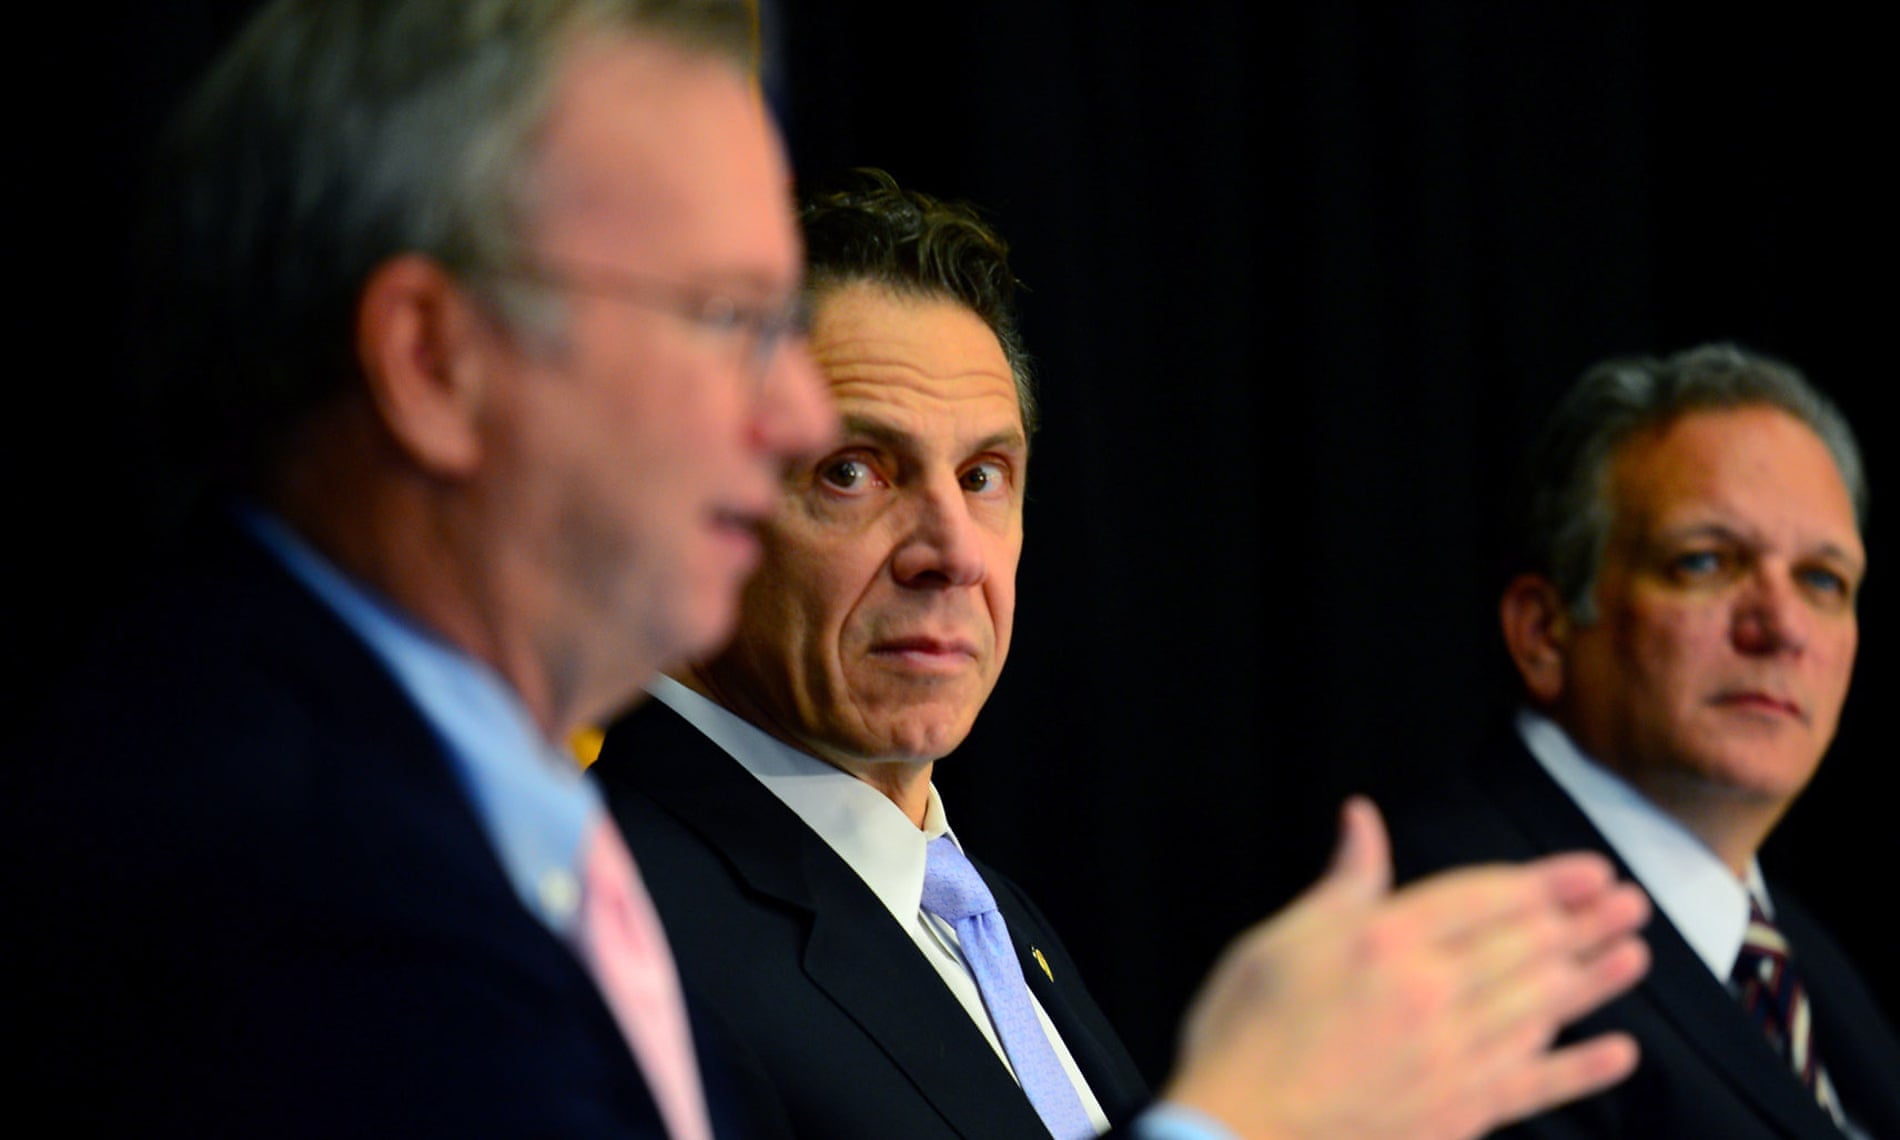 Eric Schmidt, Google’s former executive chair, left, with the New York governor Andrew Cuomo.